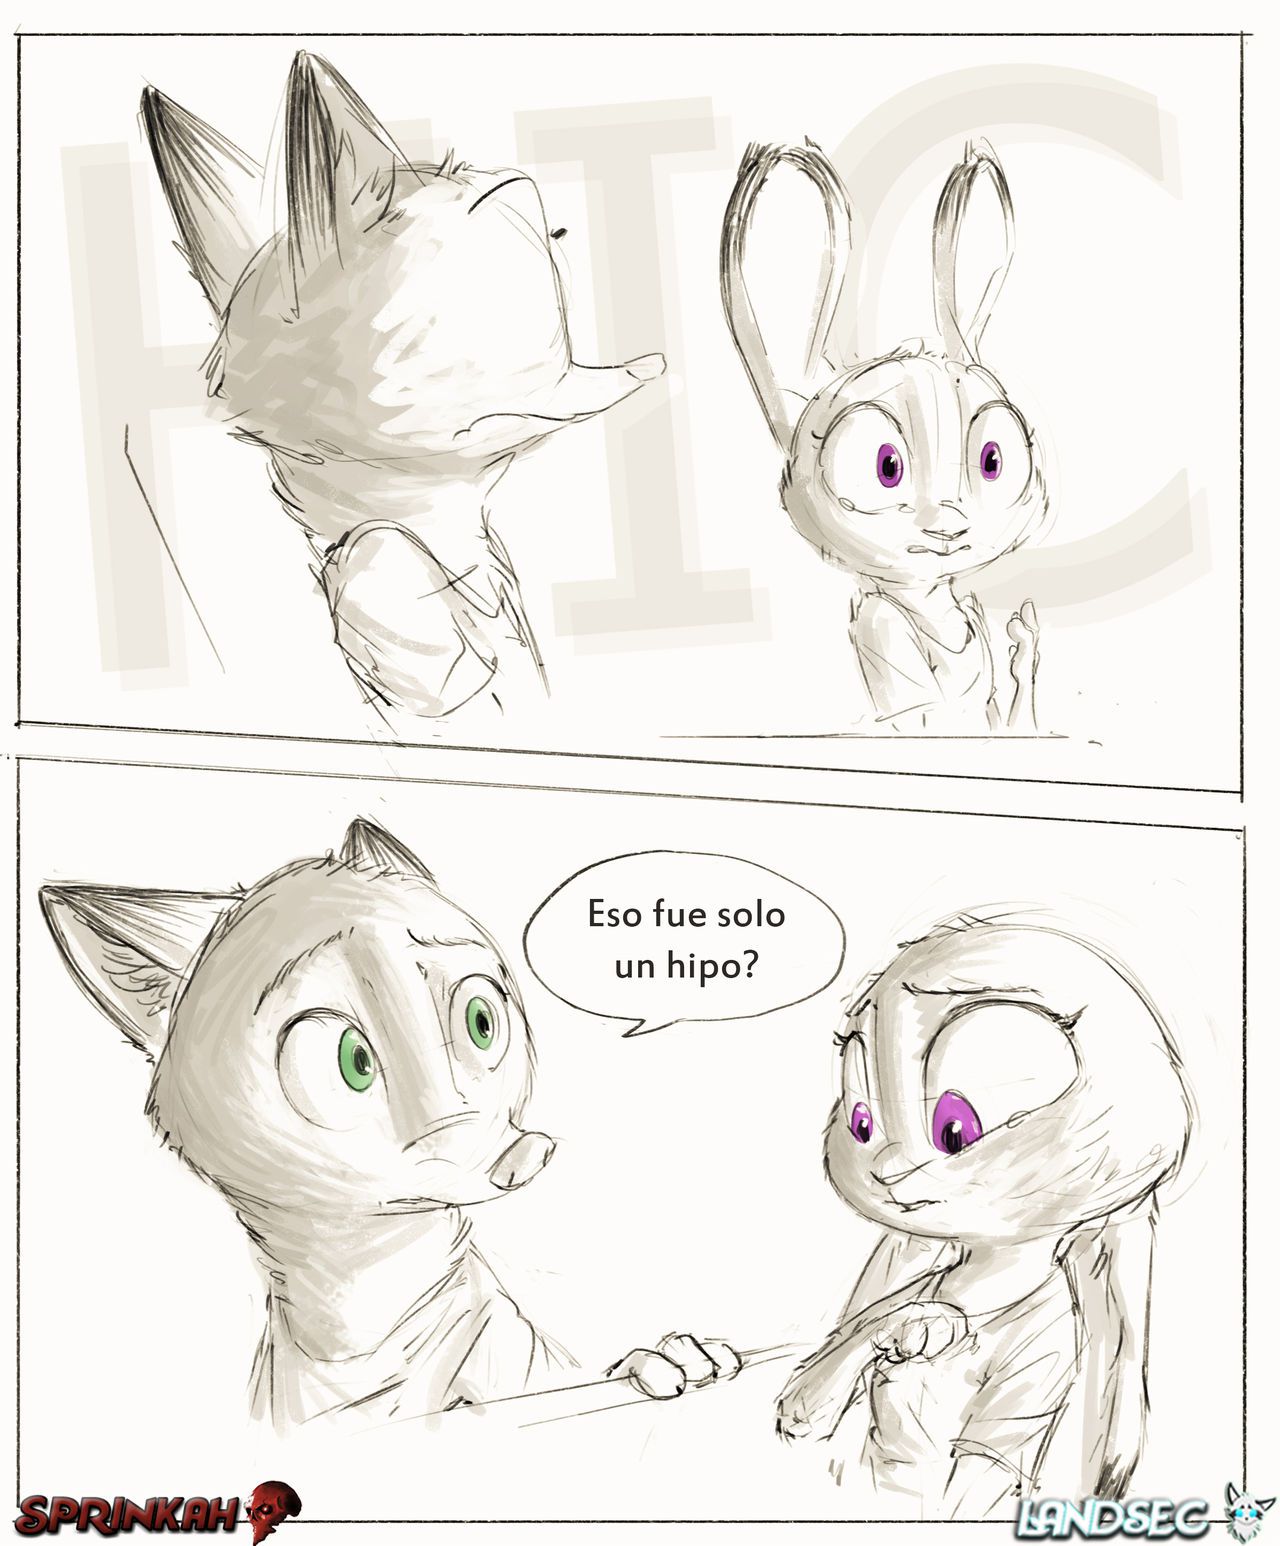 [Sprinkah] This is what true love looks like (Zootopia) (Spanish) (On Going) [Landsec] http://sprinkah.tumblr.com/ 47